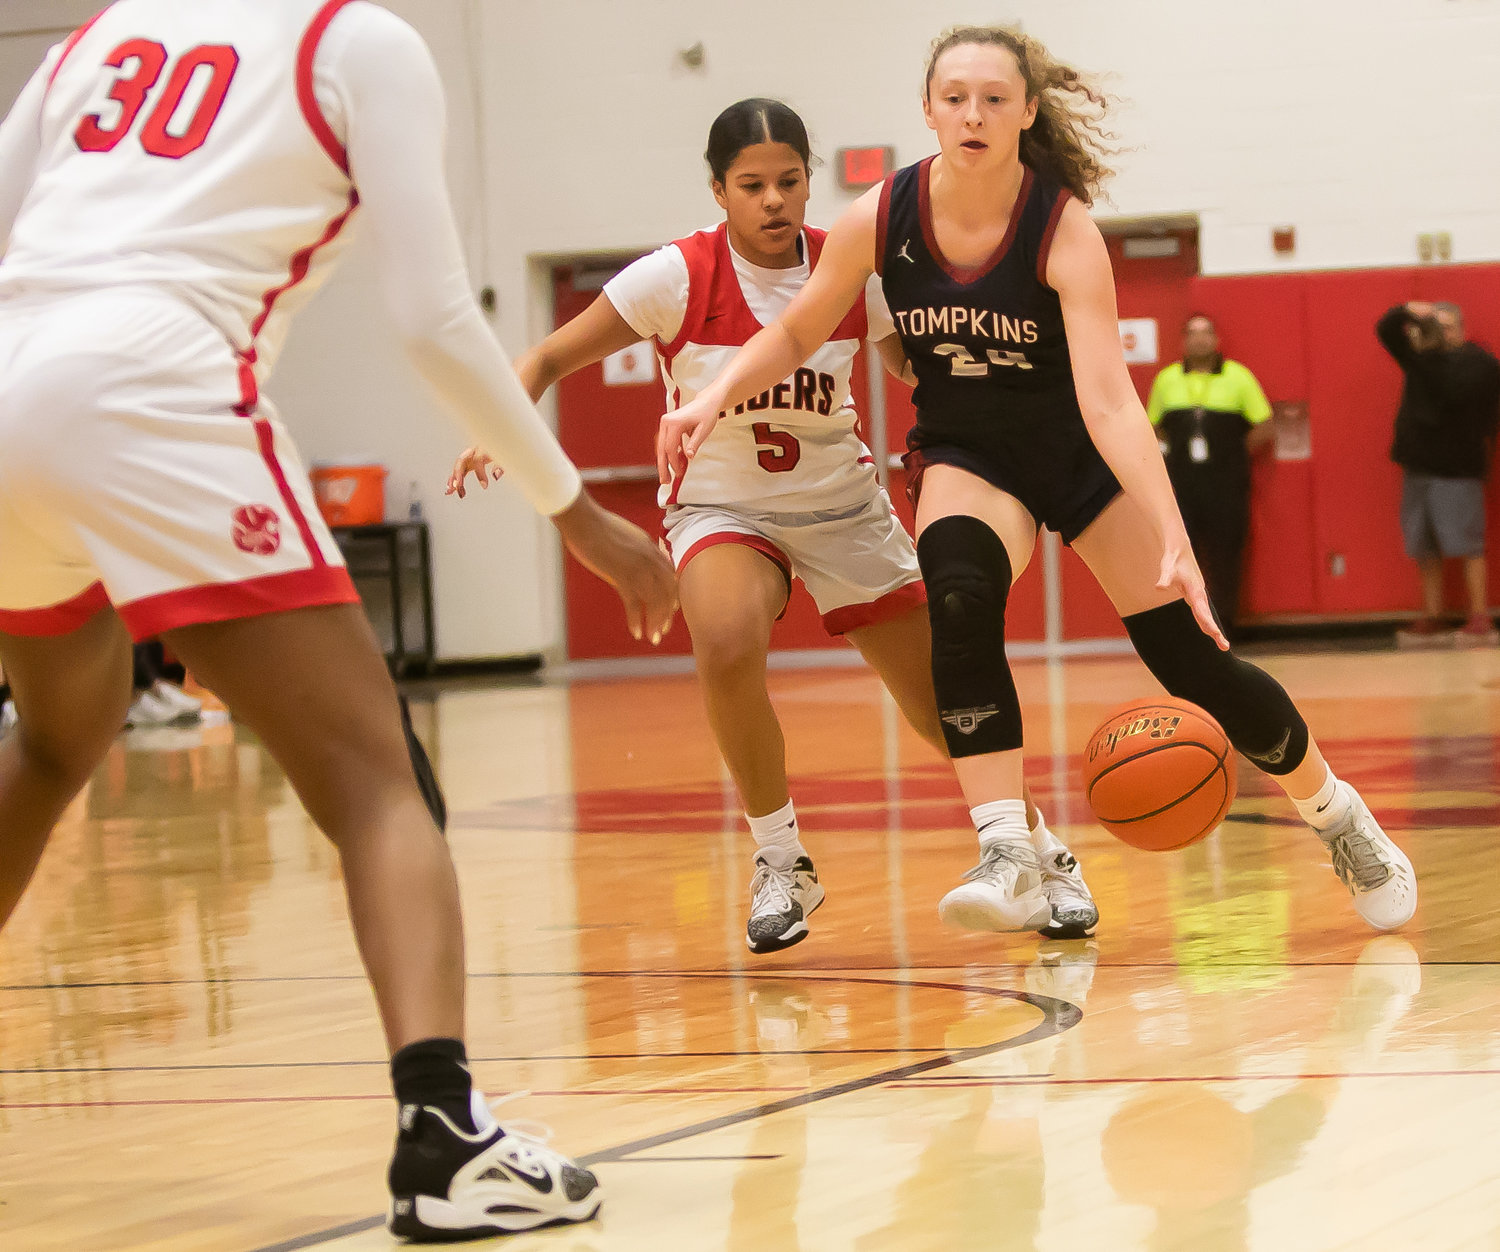 Gabby Panter gets past the Katy defense during Tuesday's game between Katy and Tompkins at the Katy gym.